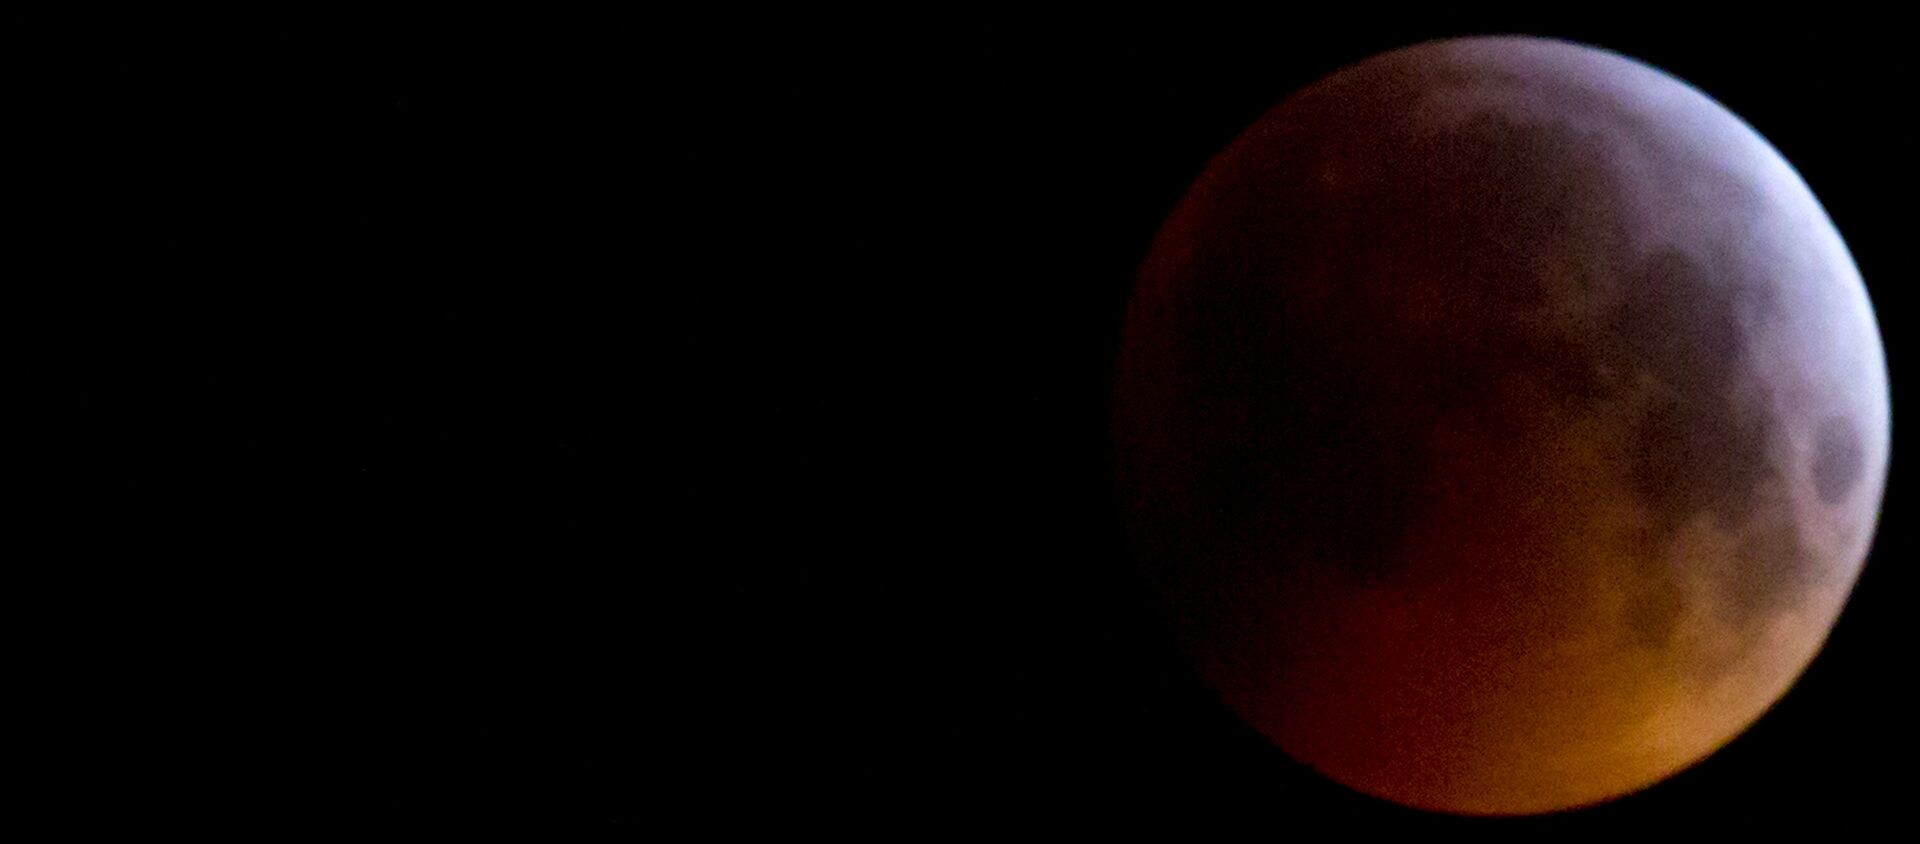 The Super Blood Wolf Moon eclipse in Antwerp, Belgium, Monday, Jan. 21, 2019. The eclipse takes place when the full moon is at or near the closest point in its orbit to Earth, a time popularly known as a supermoon. This means the Moon is deeper inside the umbra shadow and therefore may appear darker. - Sputnik International, 1920, 01.05.2020